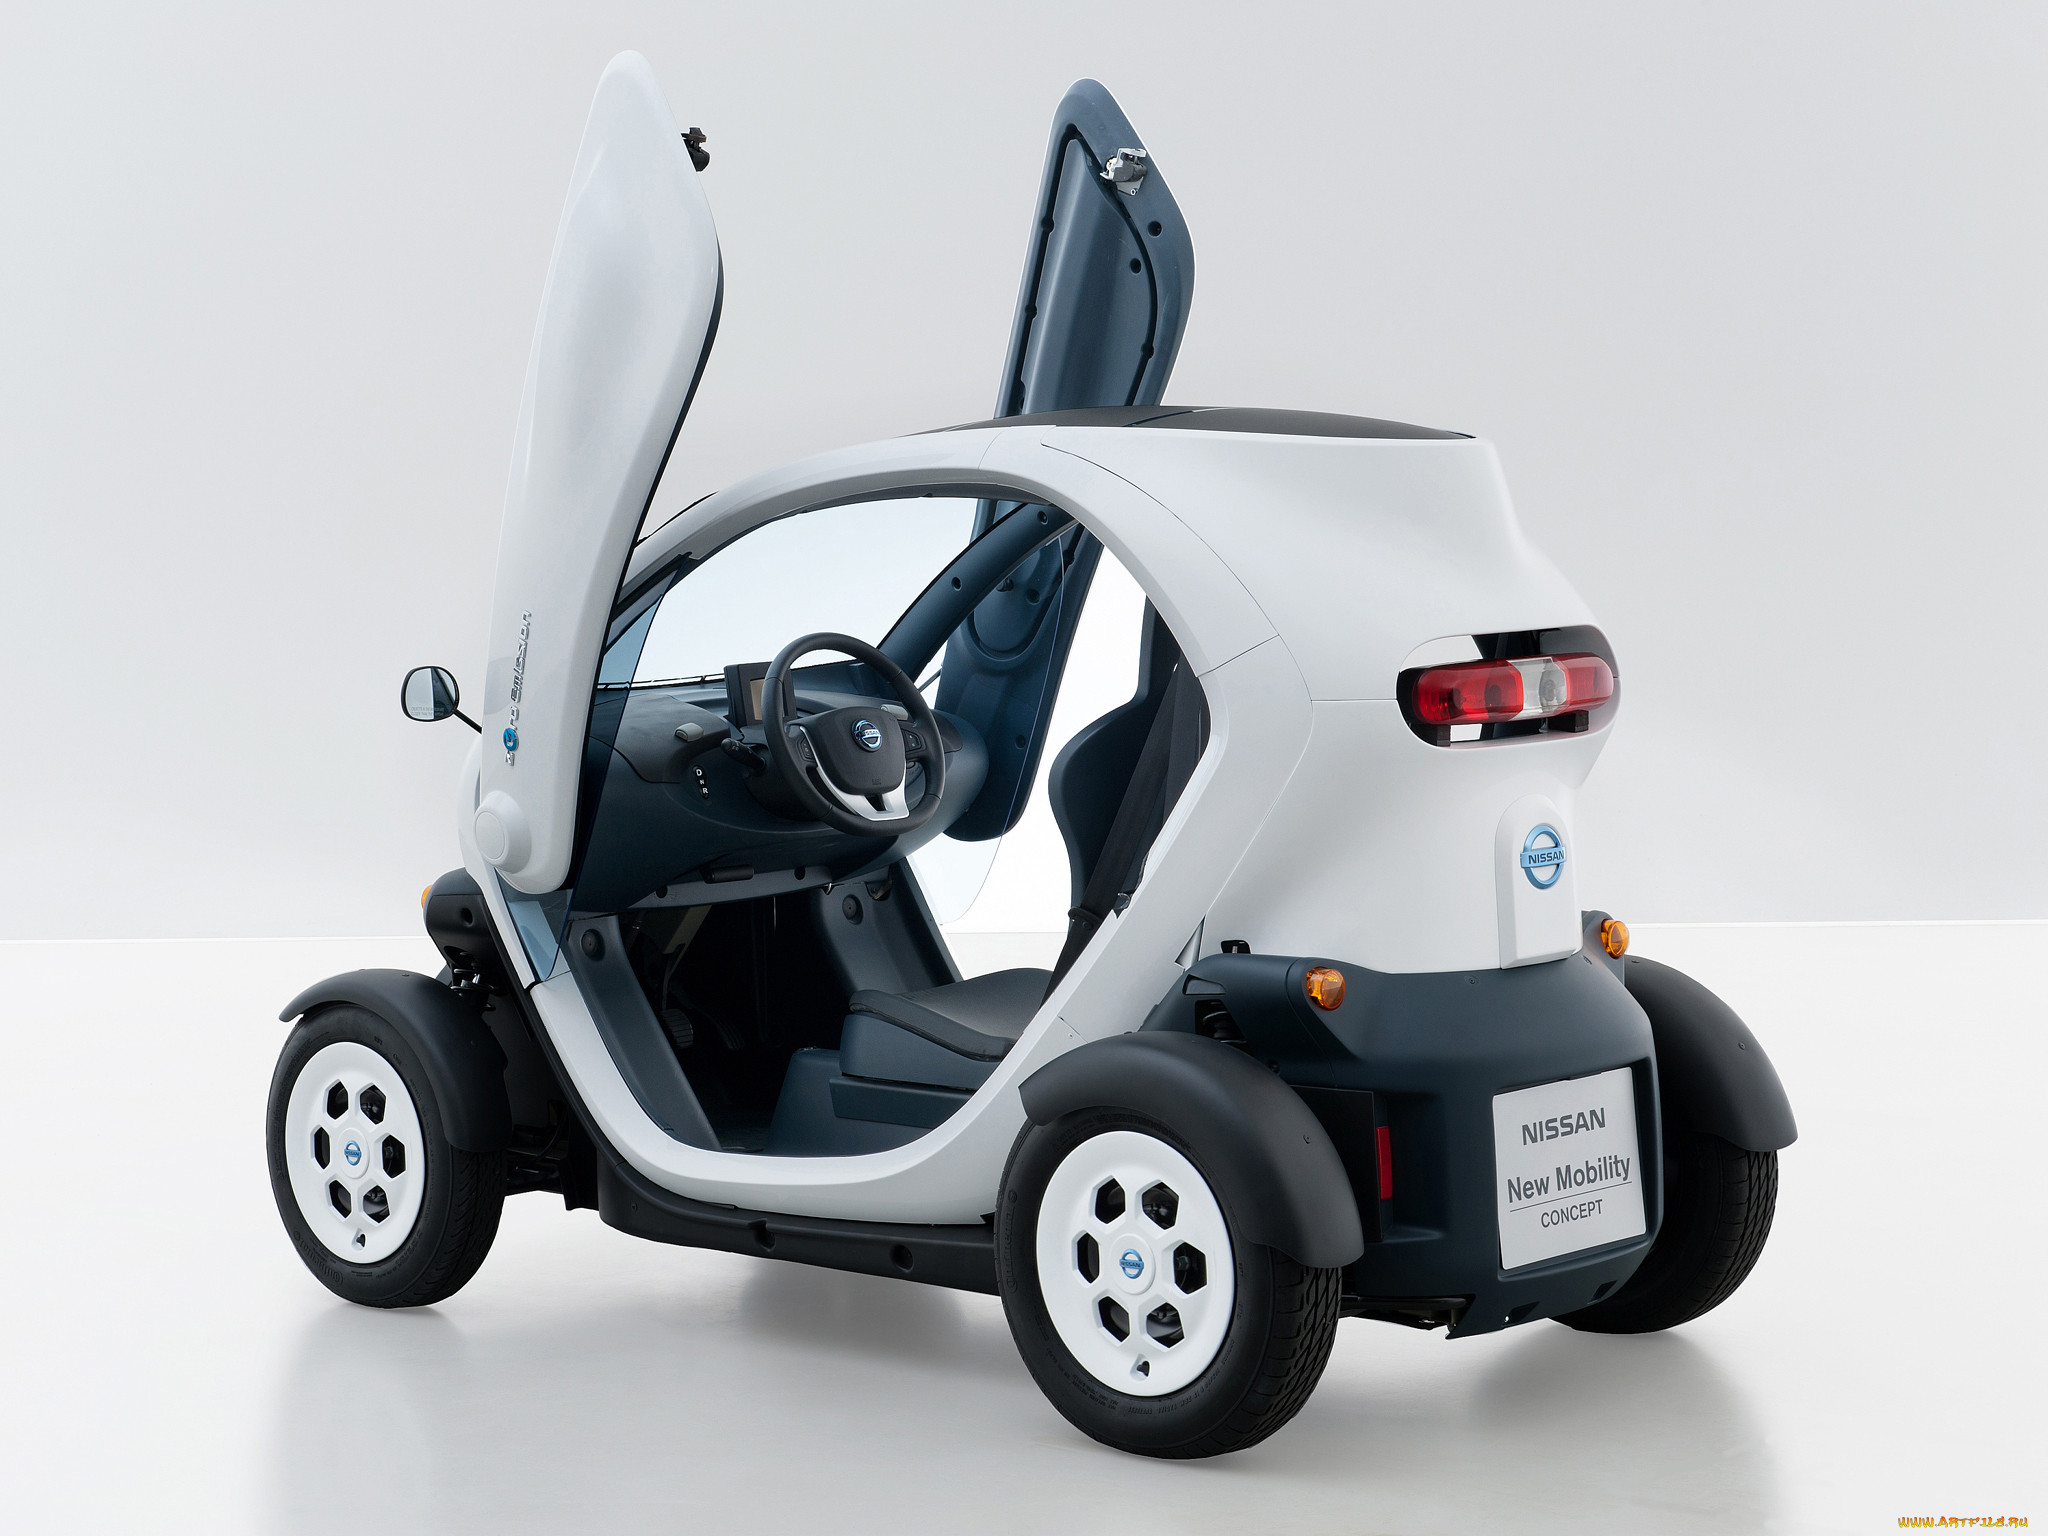 nissan new mobility concept 2011, , nissan, datsun, new, mobility, concept, 2011